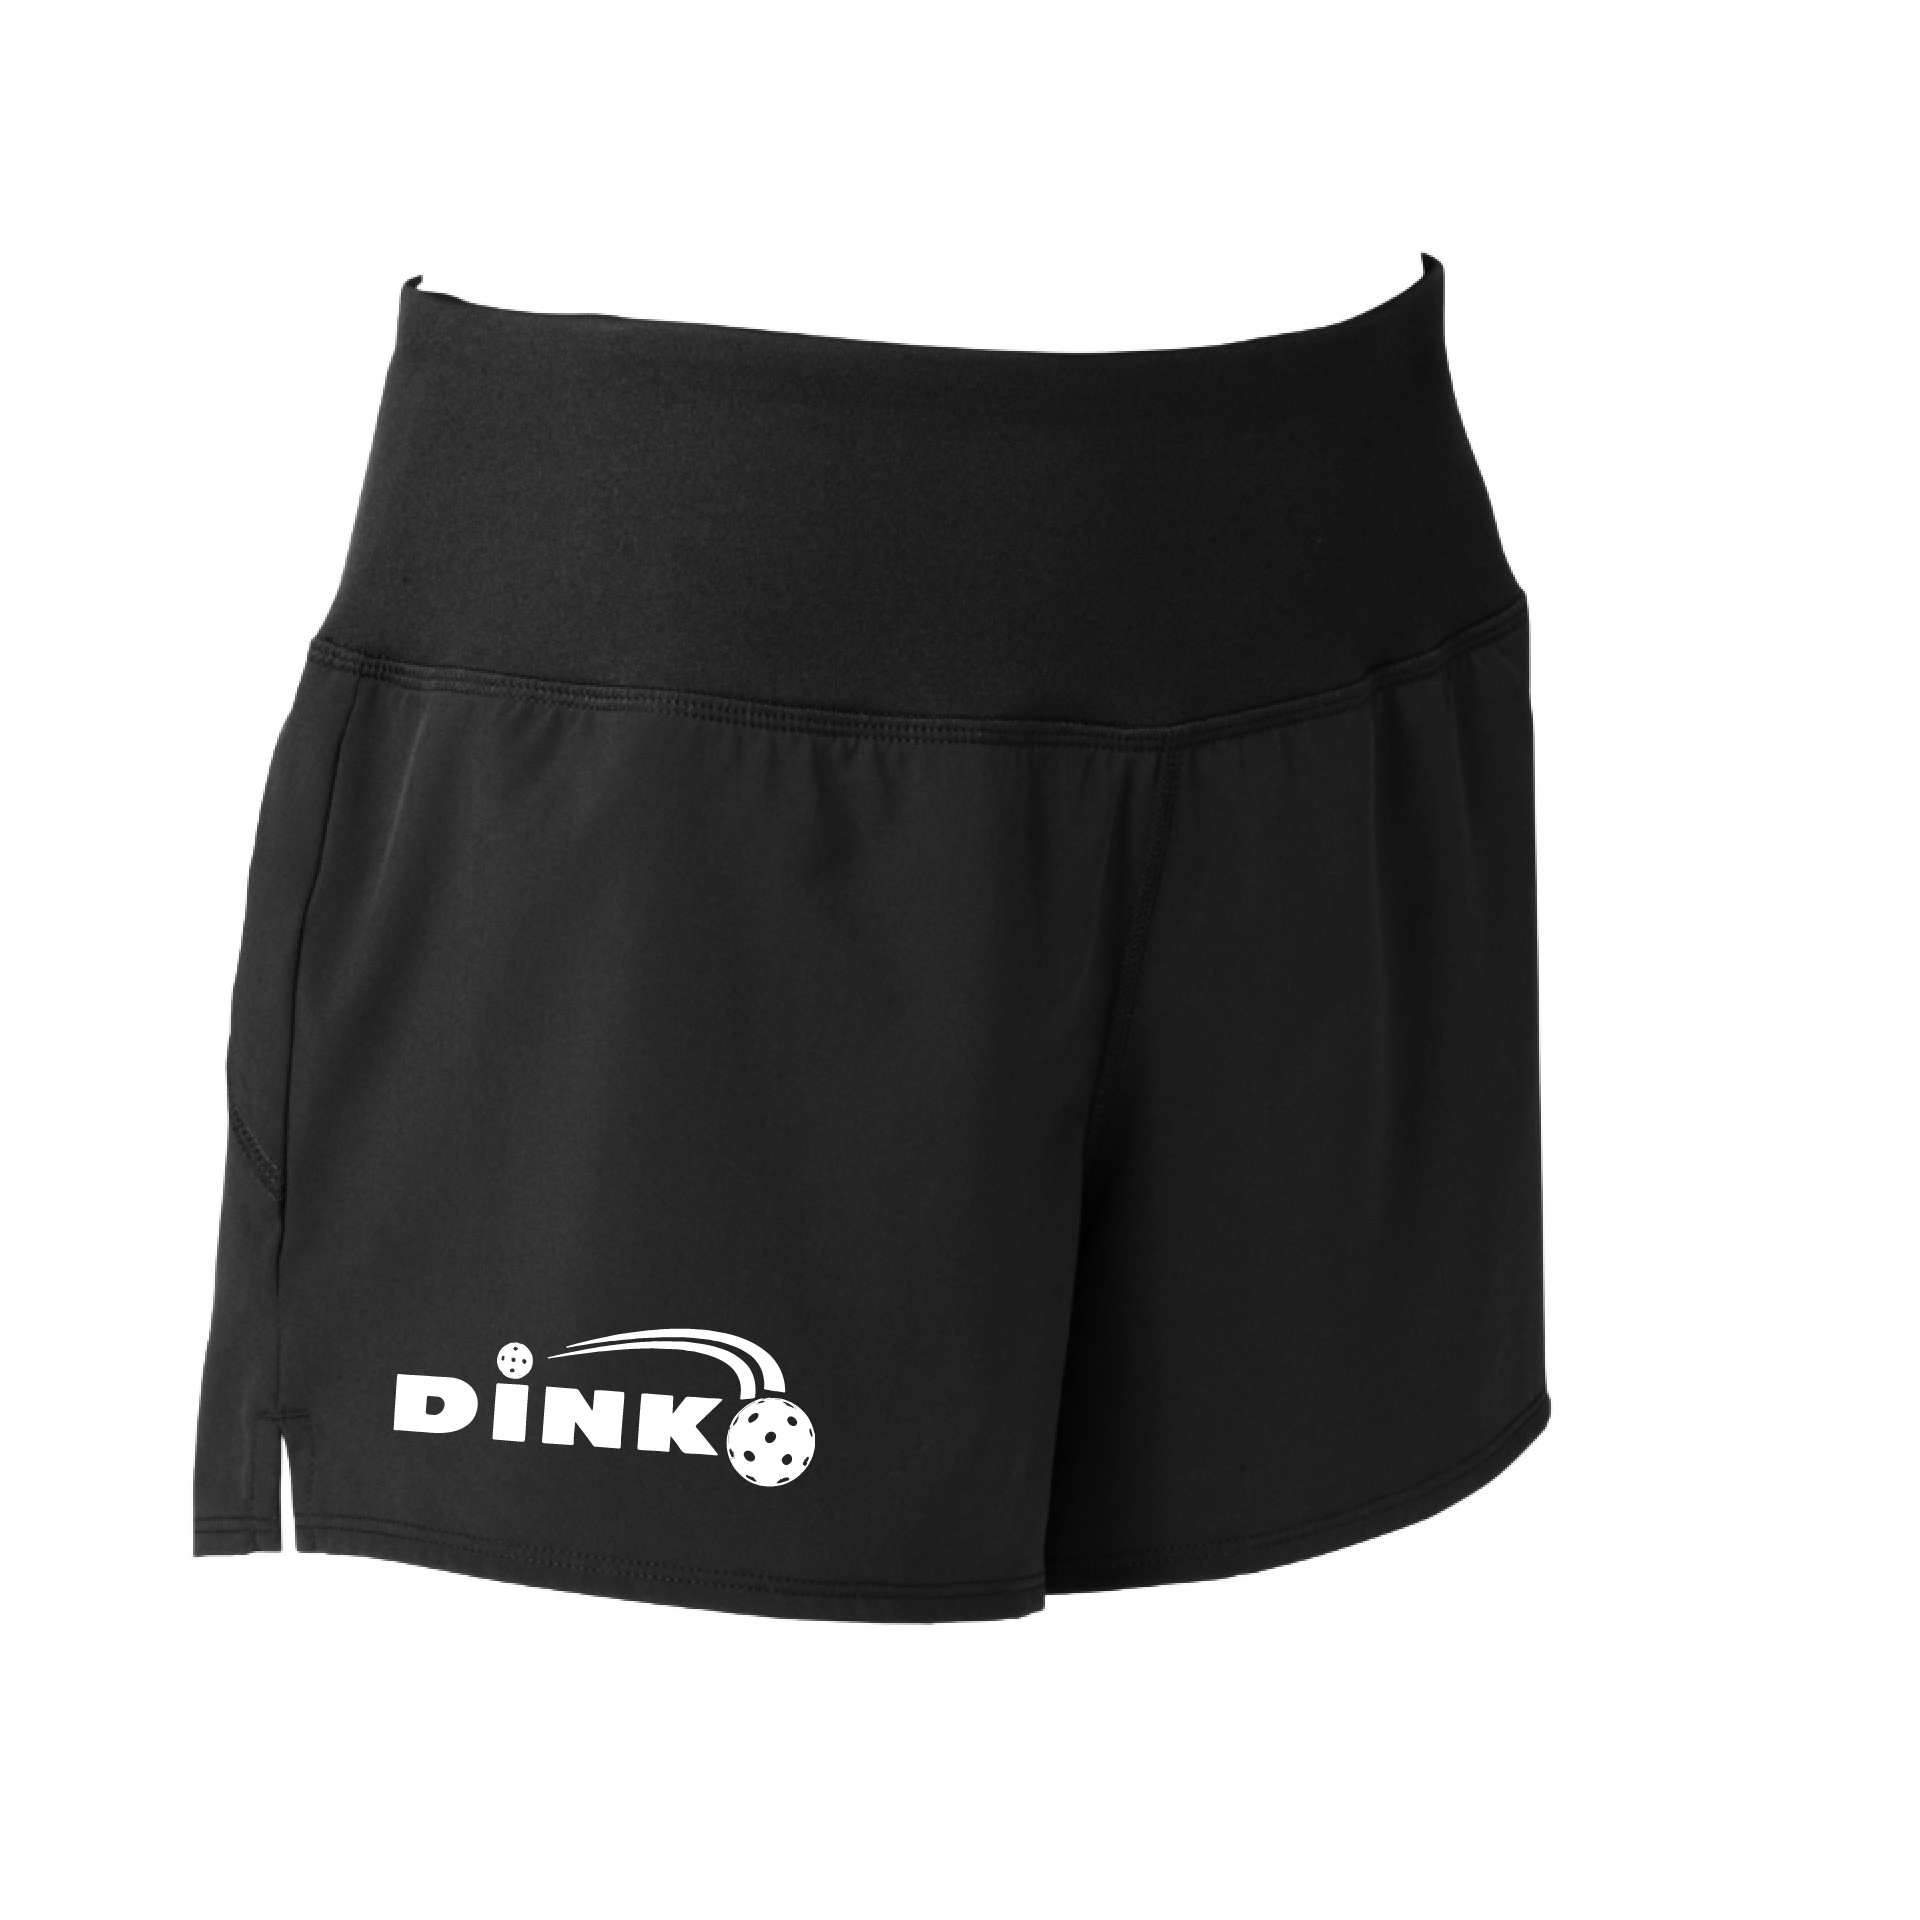 Shorts Pickleball Designs: Dink  Sport Tek women’s repeat shorts come with built-in cell phone pocket on the exterior of the waistband. You can also feel secure knowing that no matter how strenuous the exercise, the shorts will remain in place (it won’t ride up!). These shorts are extremely versatile and trendy. Transition from the Pickleball court to running errands smoothly.